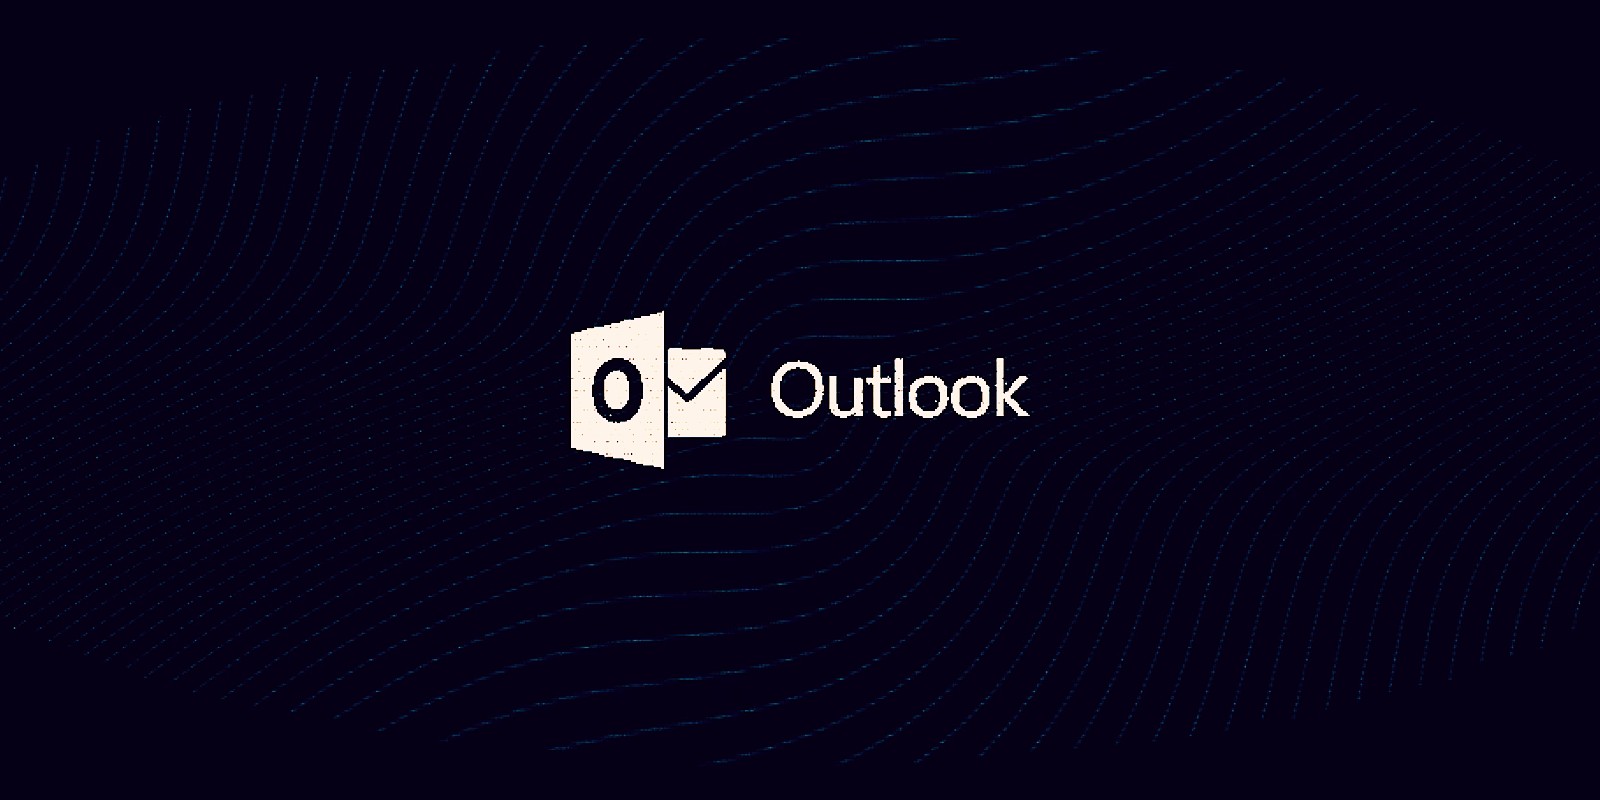 Outlook for Windows to support sending emails from proxy addresses